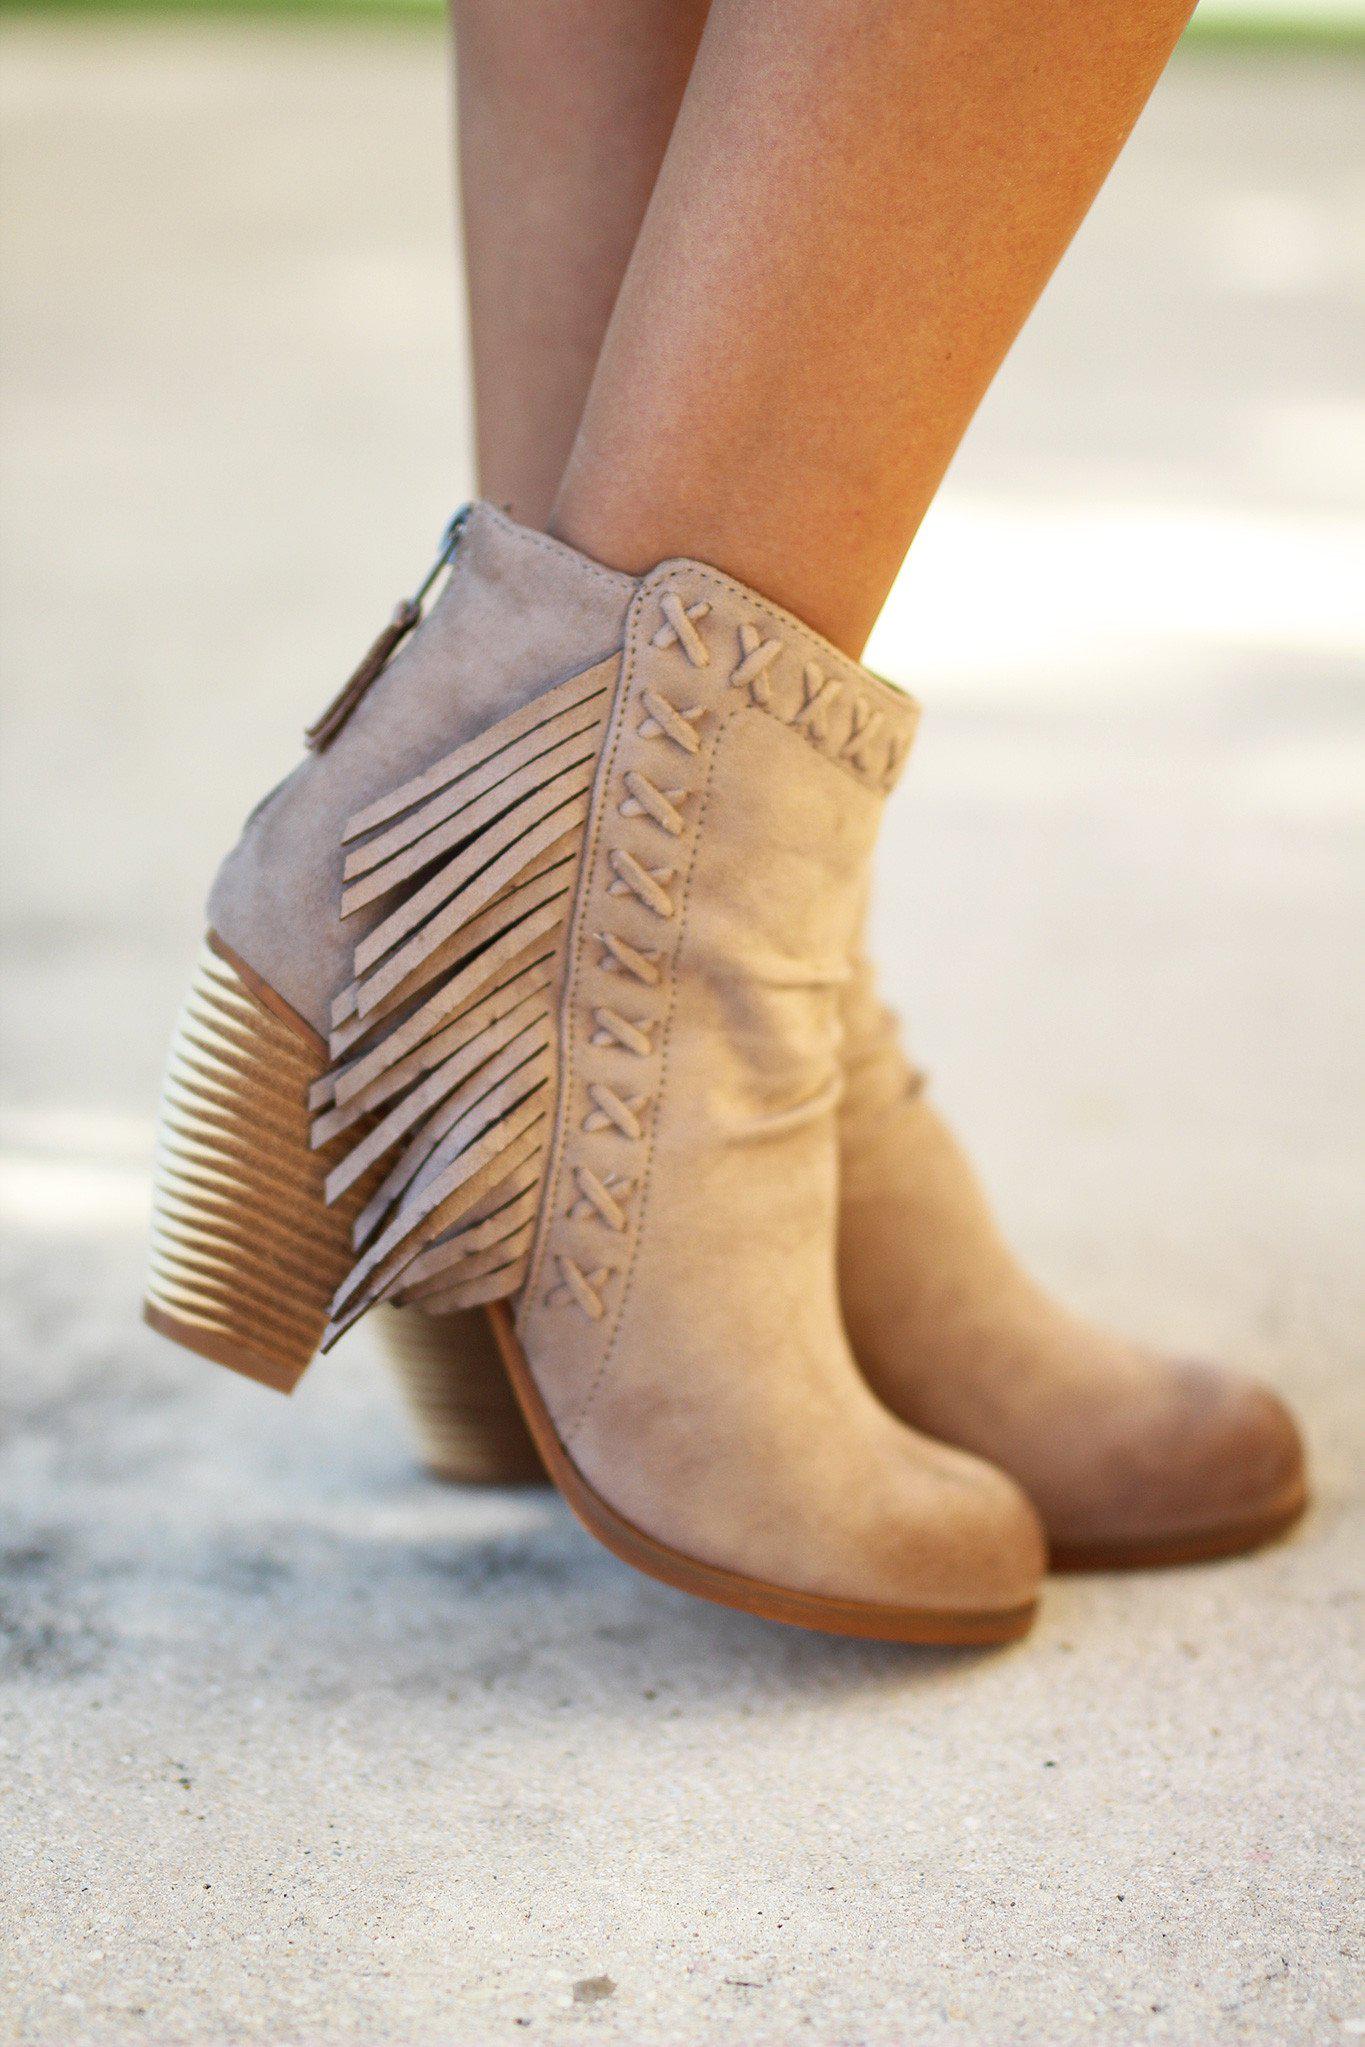 Taupe Fringe Booties | Taupe Boots | Ladies Booties | Winter Booties ...